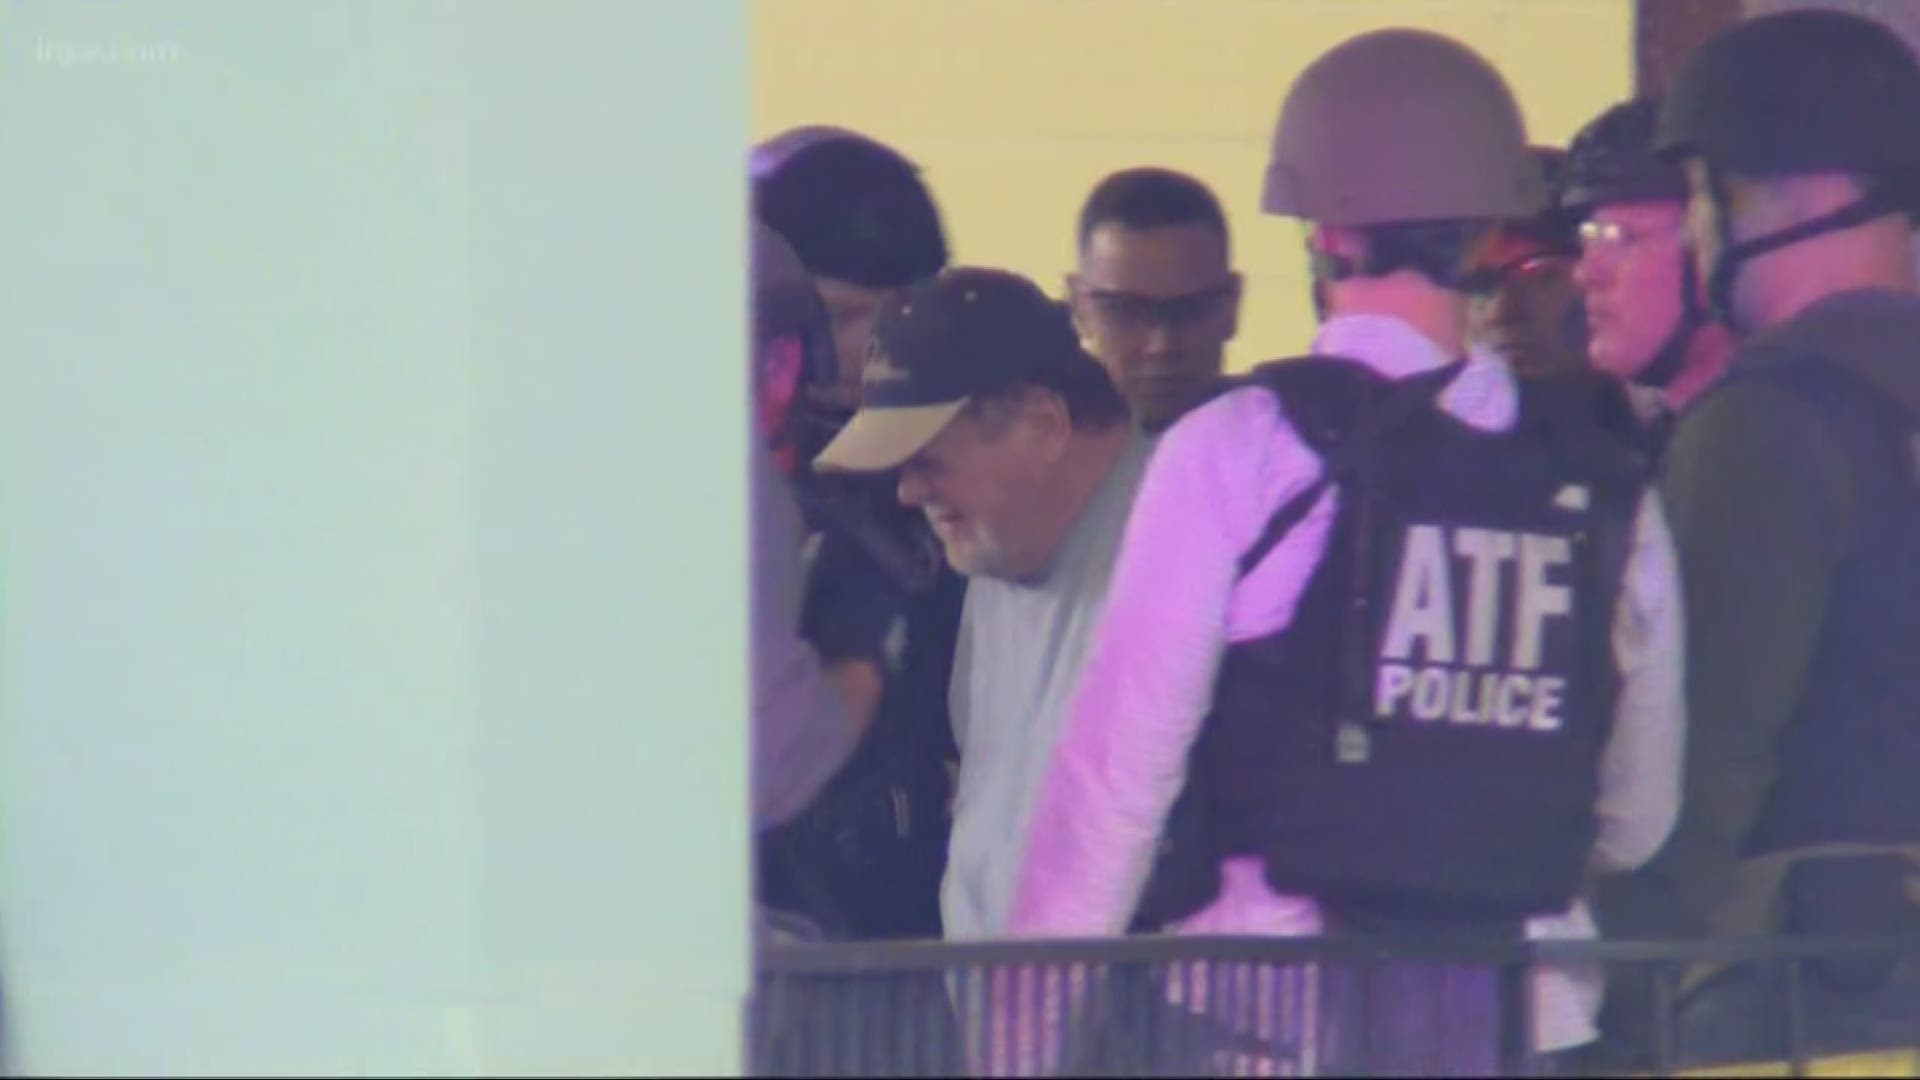 Police have identified 80-year-old Robert Breck as the man involved in the shooting at the Smith Tower Apartments in downtown Vancouver.